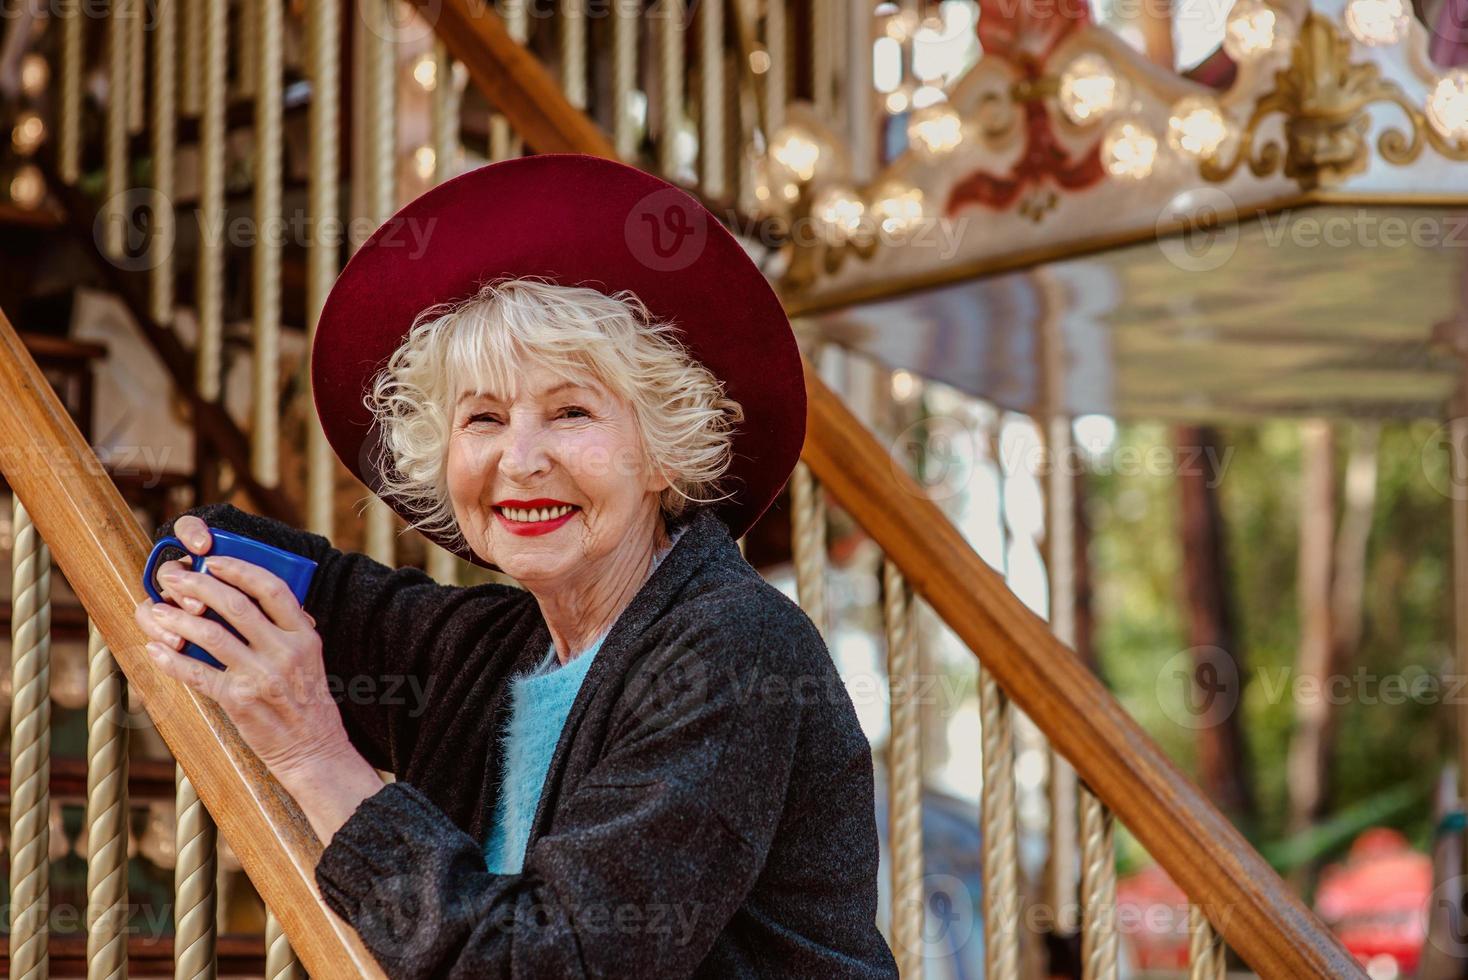 senior stylish woman in dark grey coat, hat and with grey hair standing by the carousel smiling, drinking coffee and enjoying life. Travel, fun, pension, happiness, seasonal concept photo